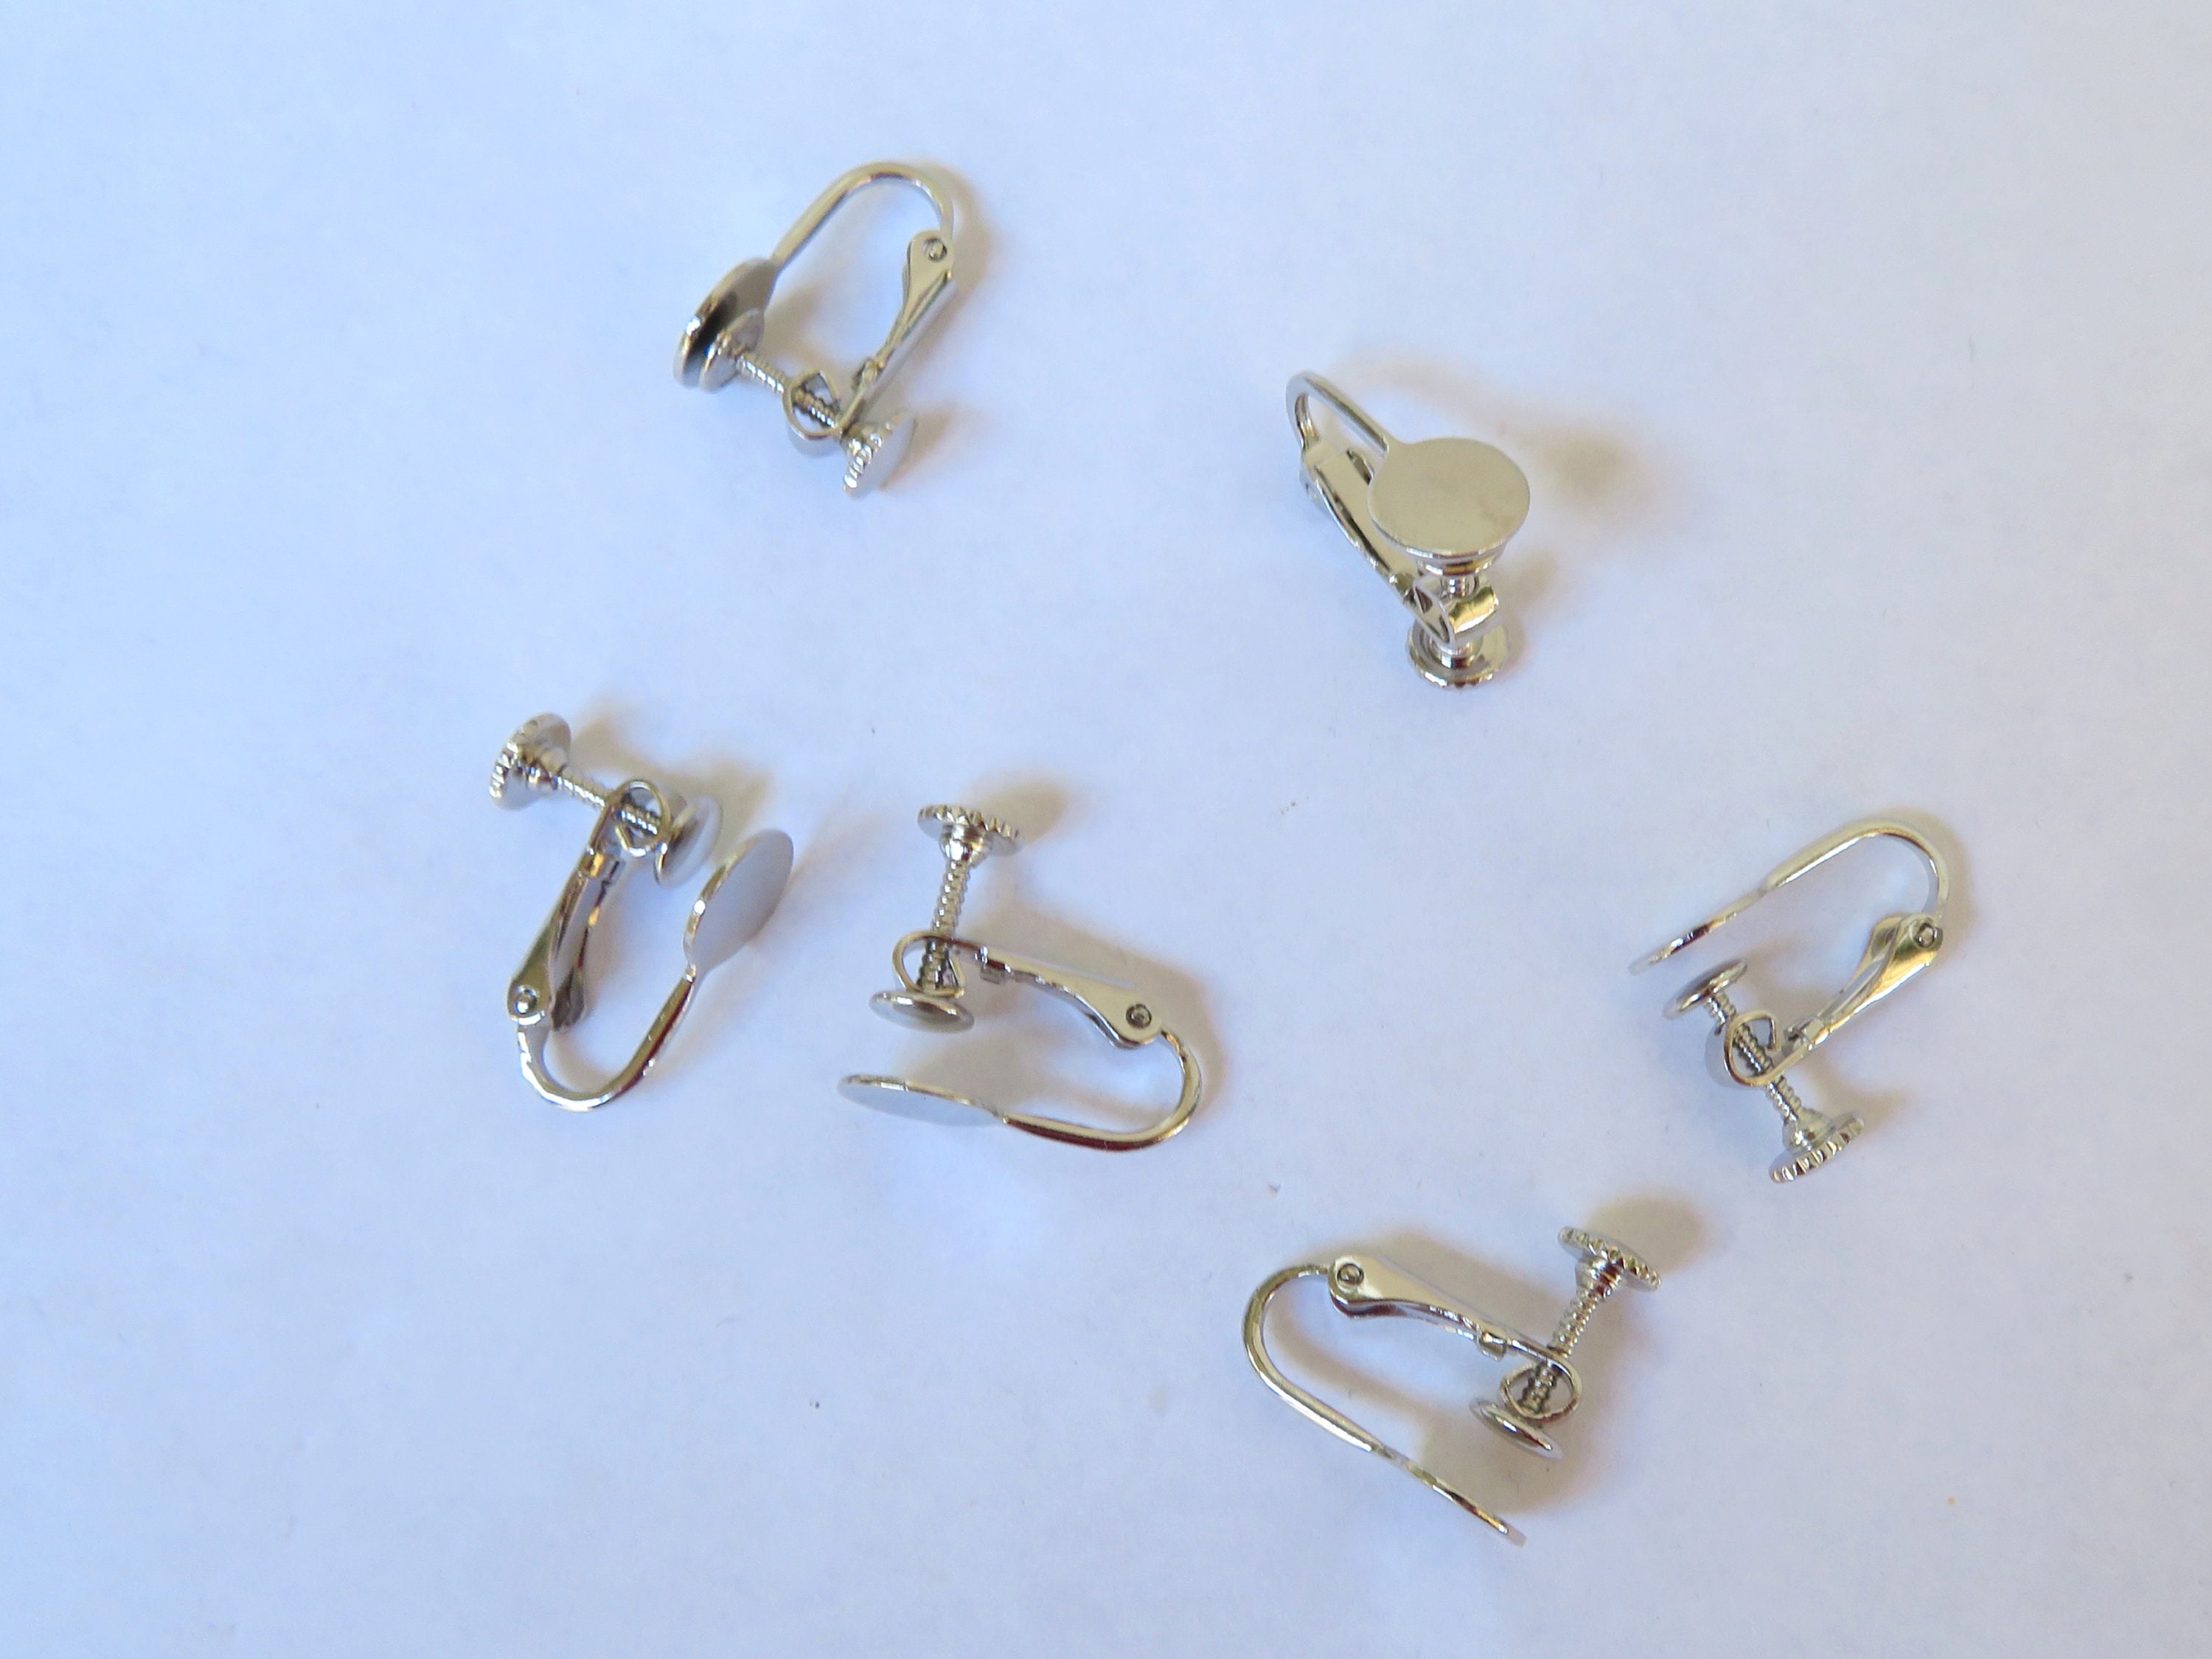 10 Pair Silver or Gold Tone Metal Clip on Earring Backs Backings Large 20mm  Flat Pad Findings Hardware 